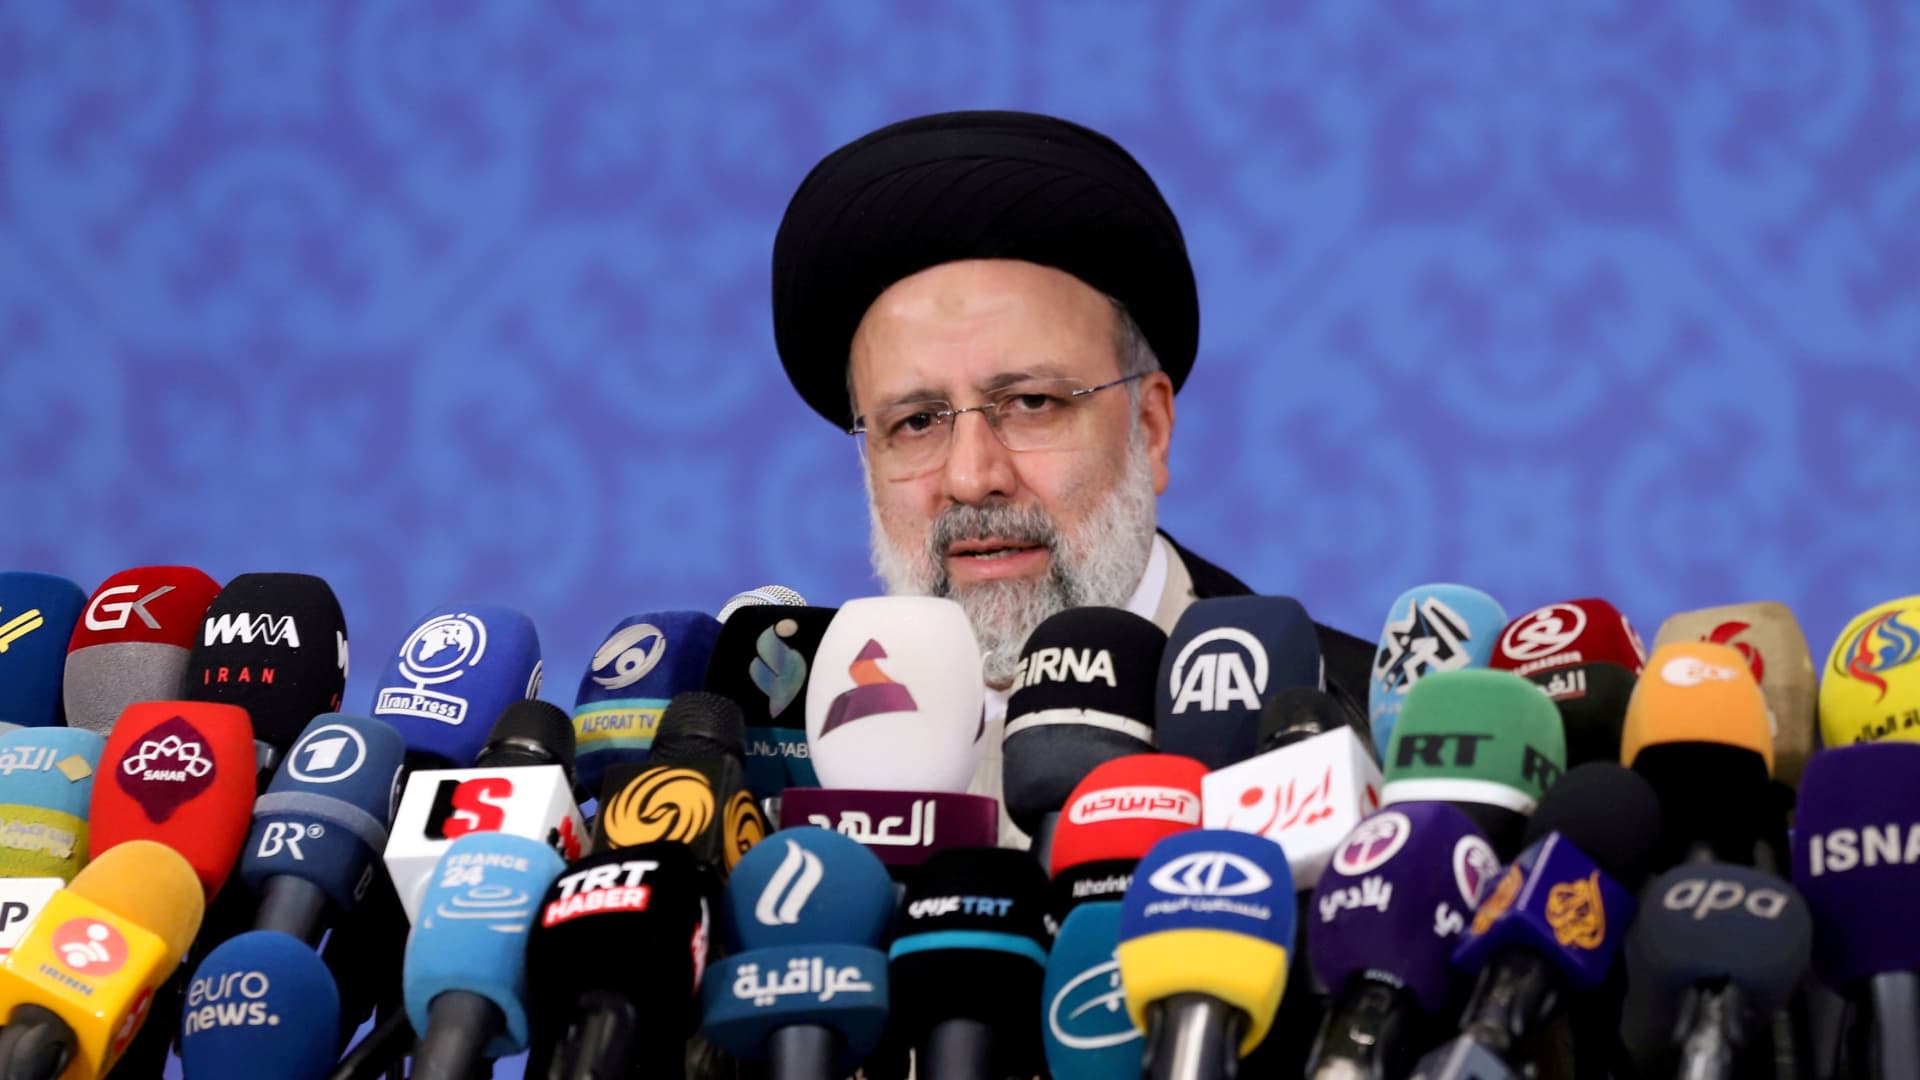 Ebrahim Raisi, who assumed office as Iran's president this month, speaks during a news conference in Tehran, Iran June 21, 2021.